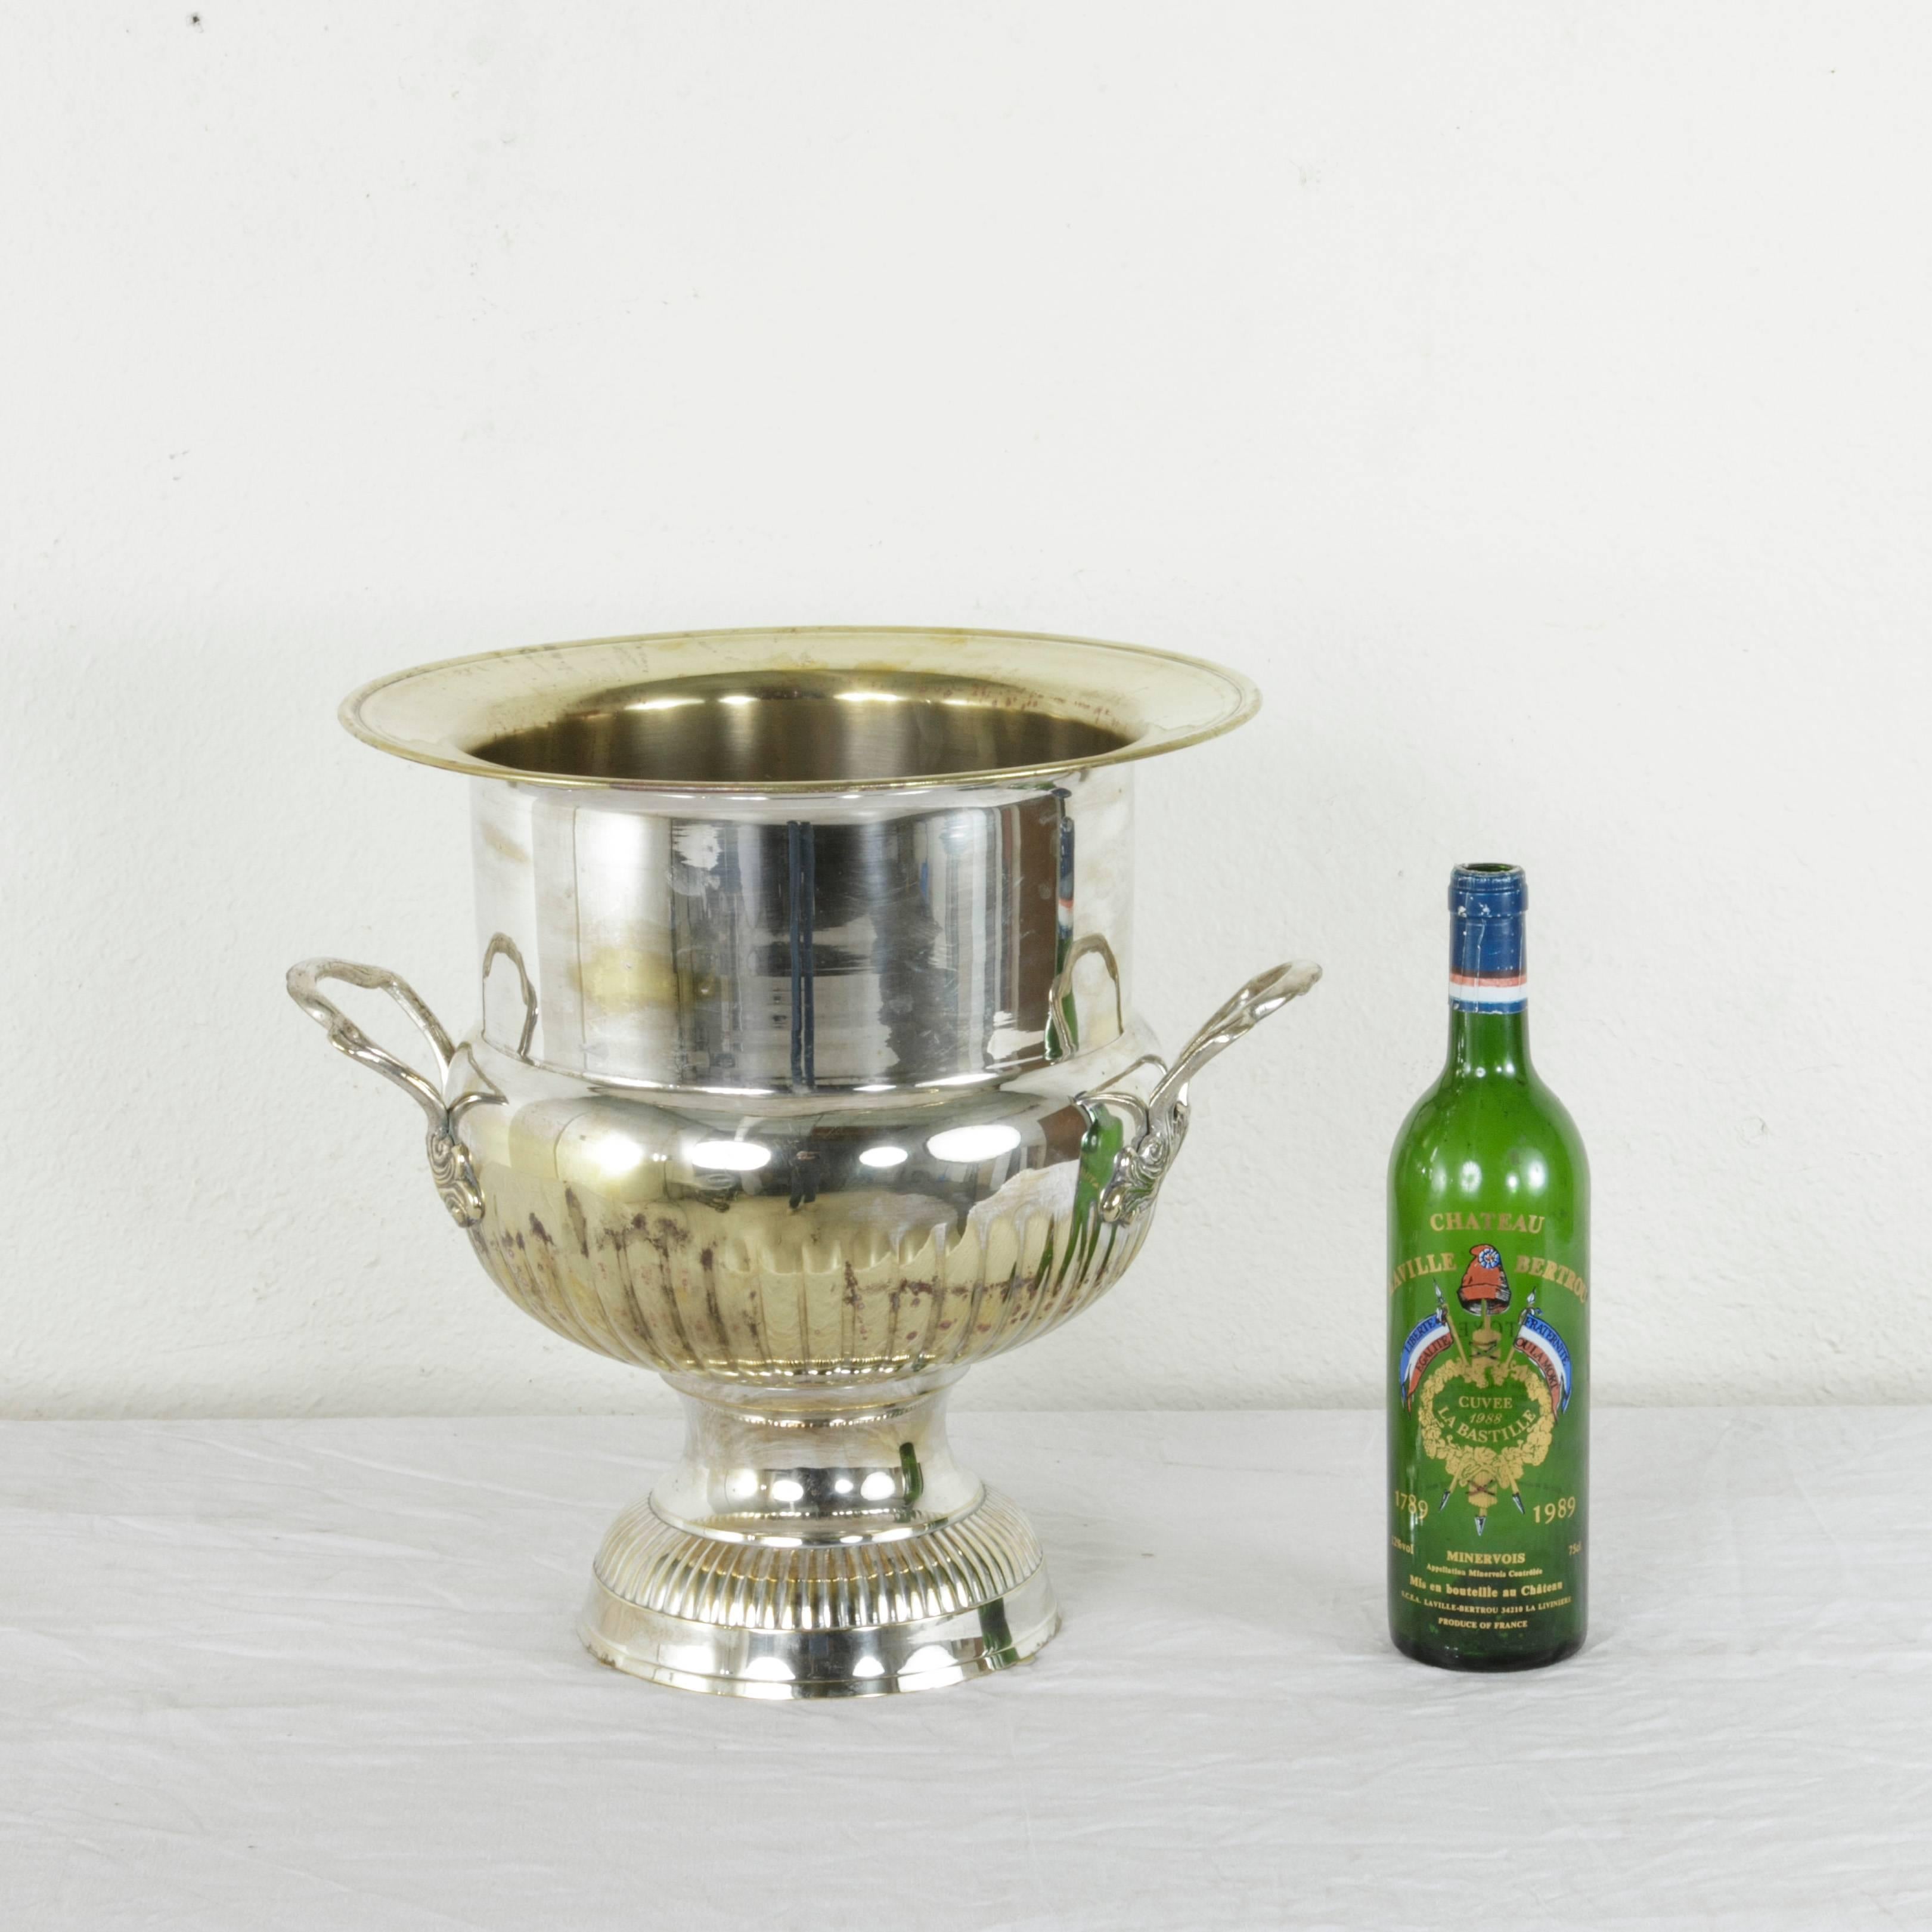 This very large midcentury French hotel champagne bucket in the shape of a Versailles urn stands at an impressive fourteen and a half inches in height and holds up to four bottles. Handles with detailing of leaves adorn each side and allow for